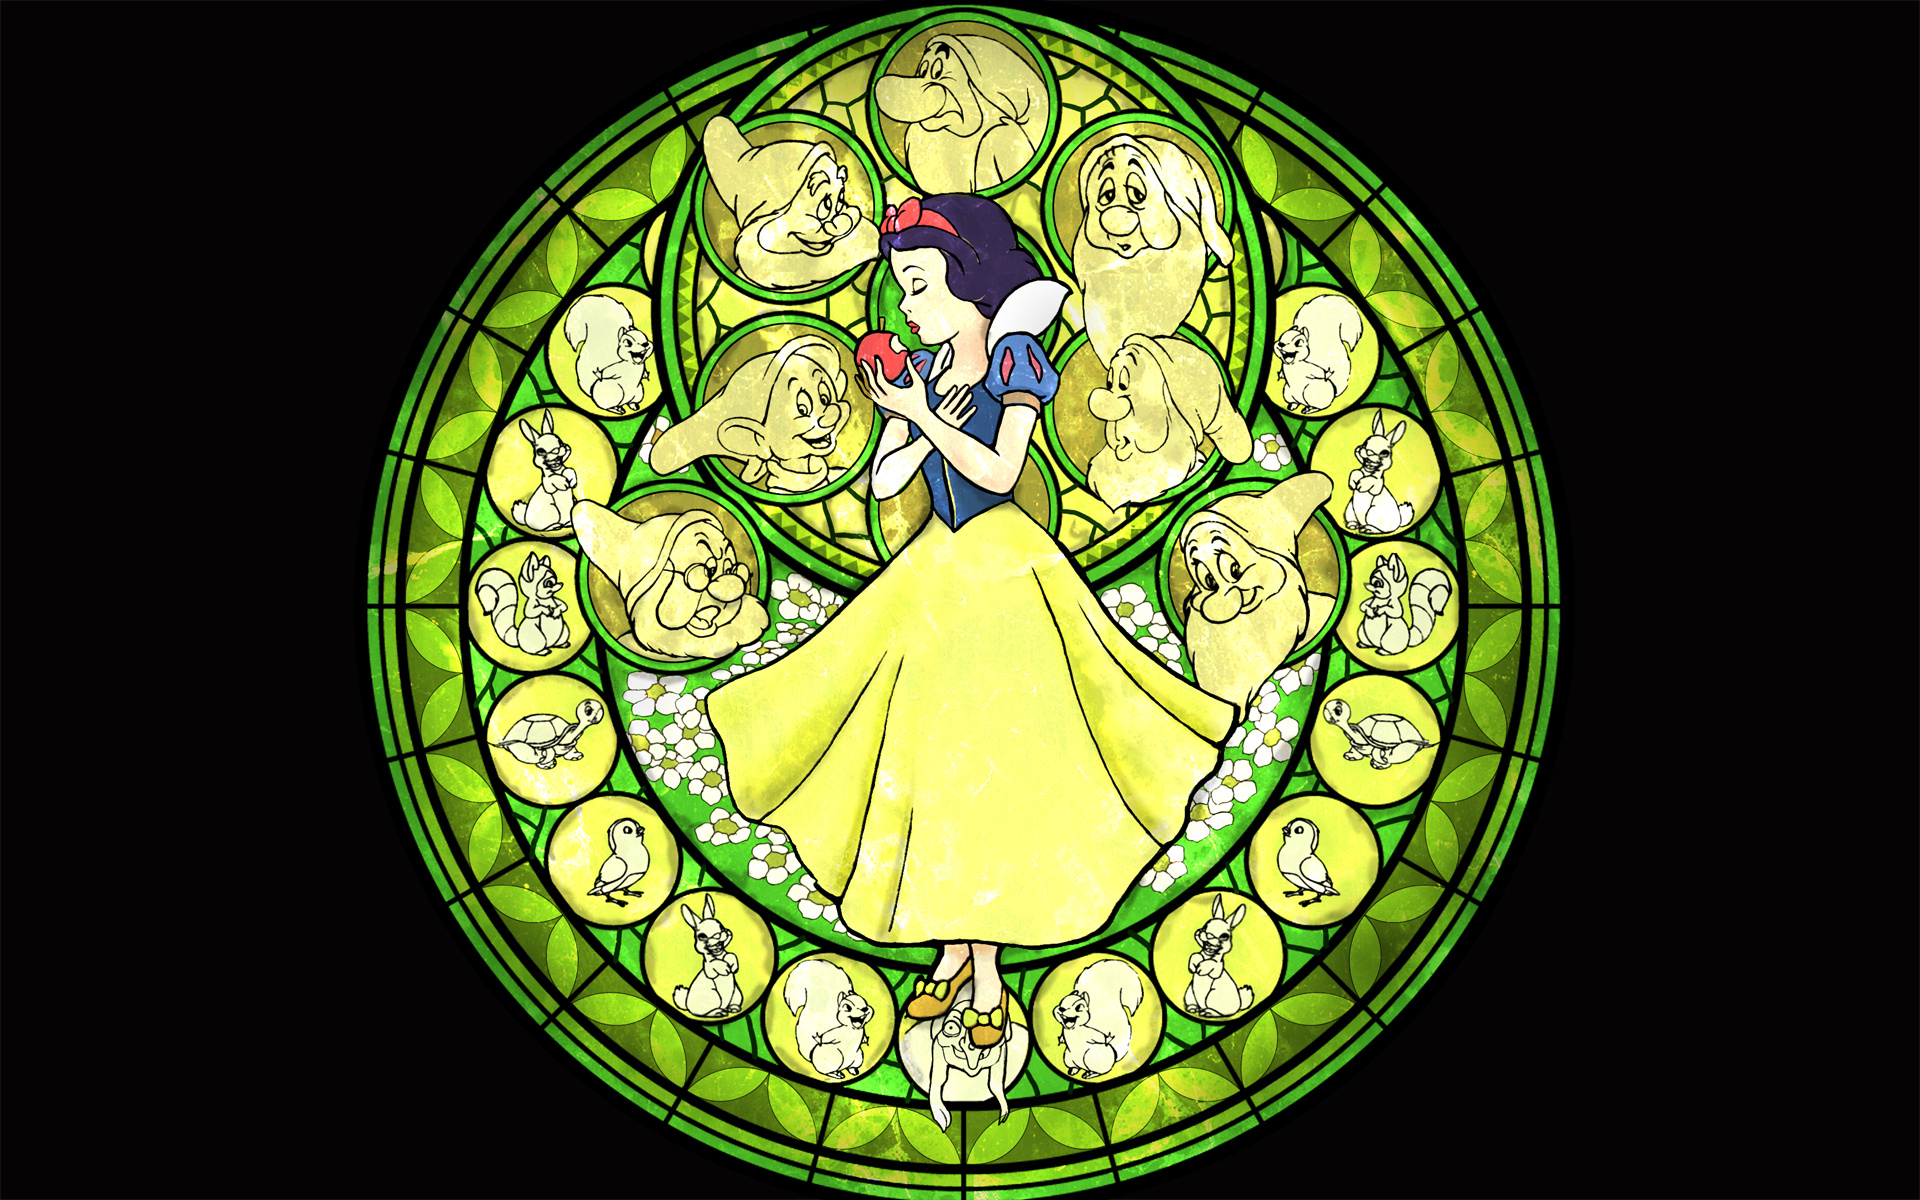 Snow White and the Seven Dwarfs, High-definition wallpapers, Enchanting backgrounds, Classic animation, 1920x1200 HD Desktop